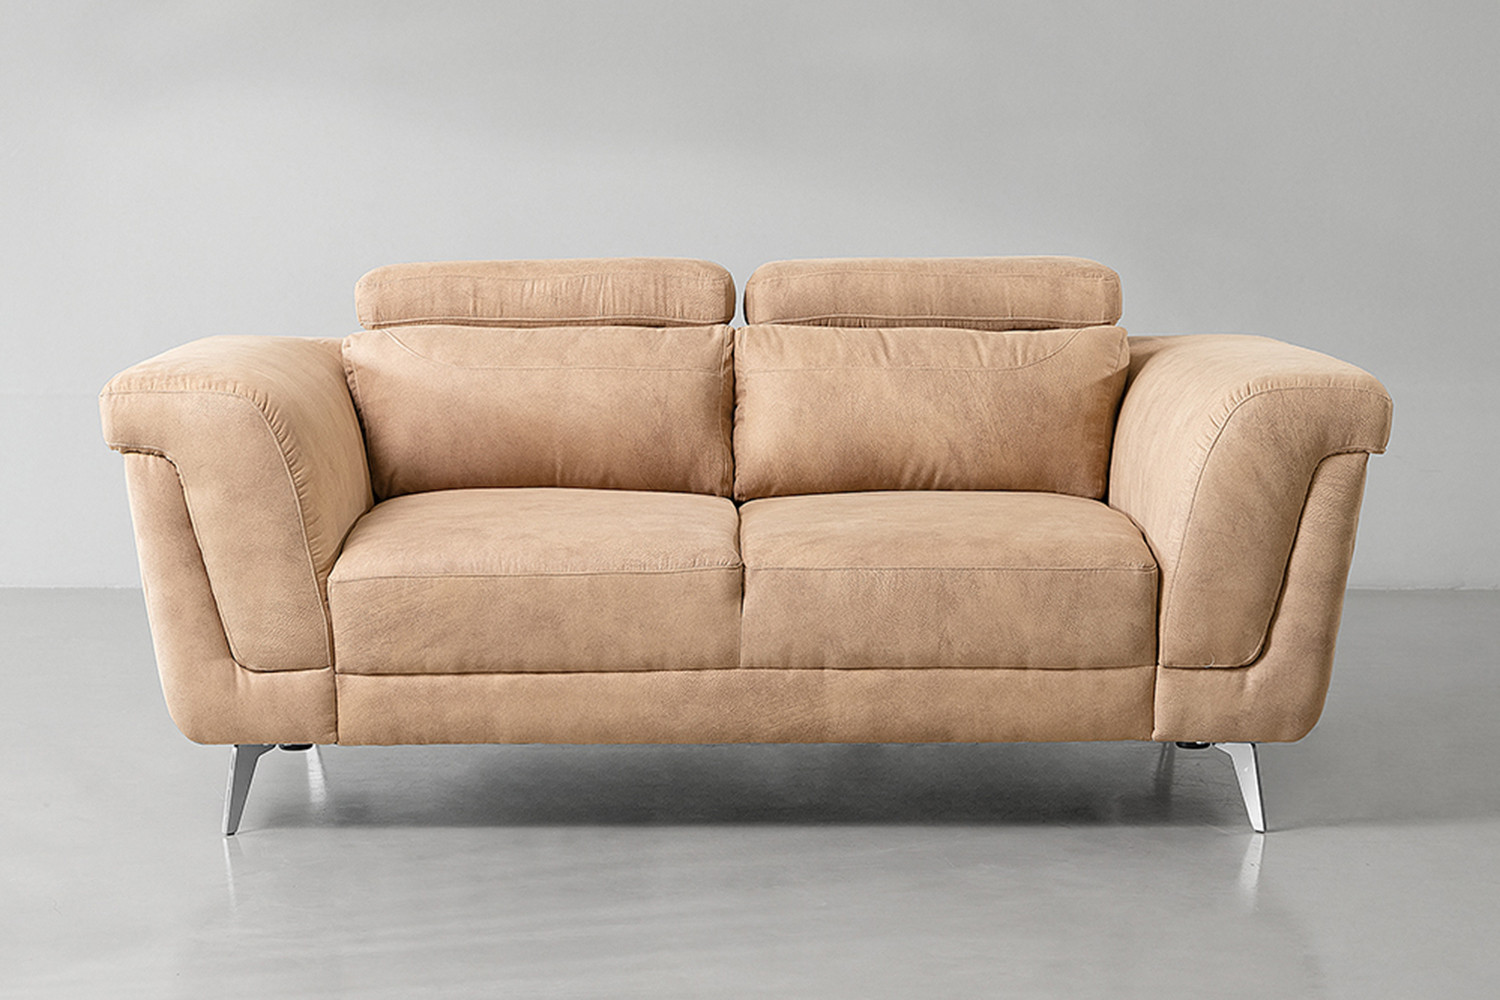 Laurence 2 Seater Couch - Tan 2 Seater Couches - 3